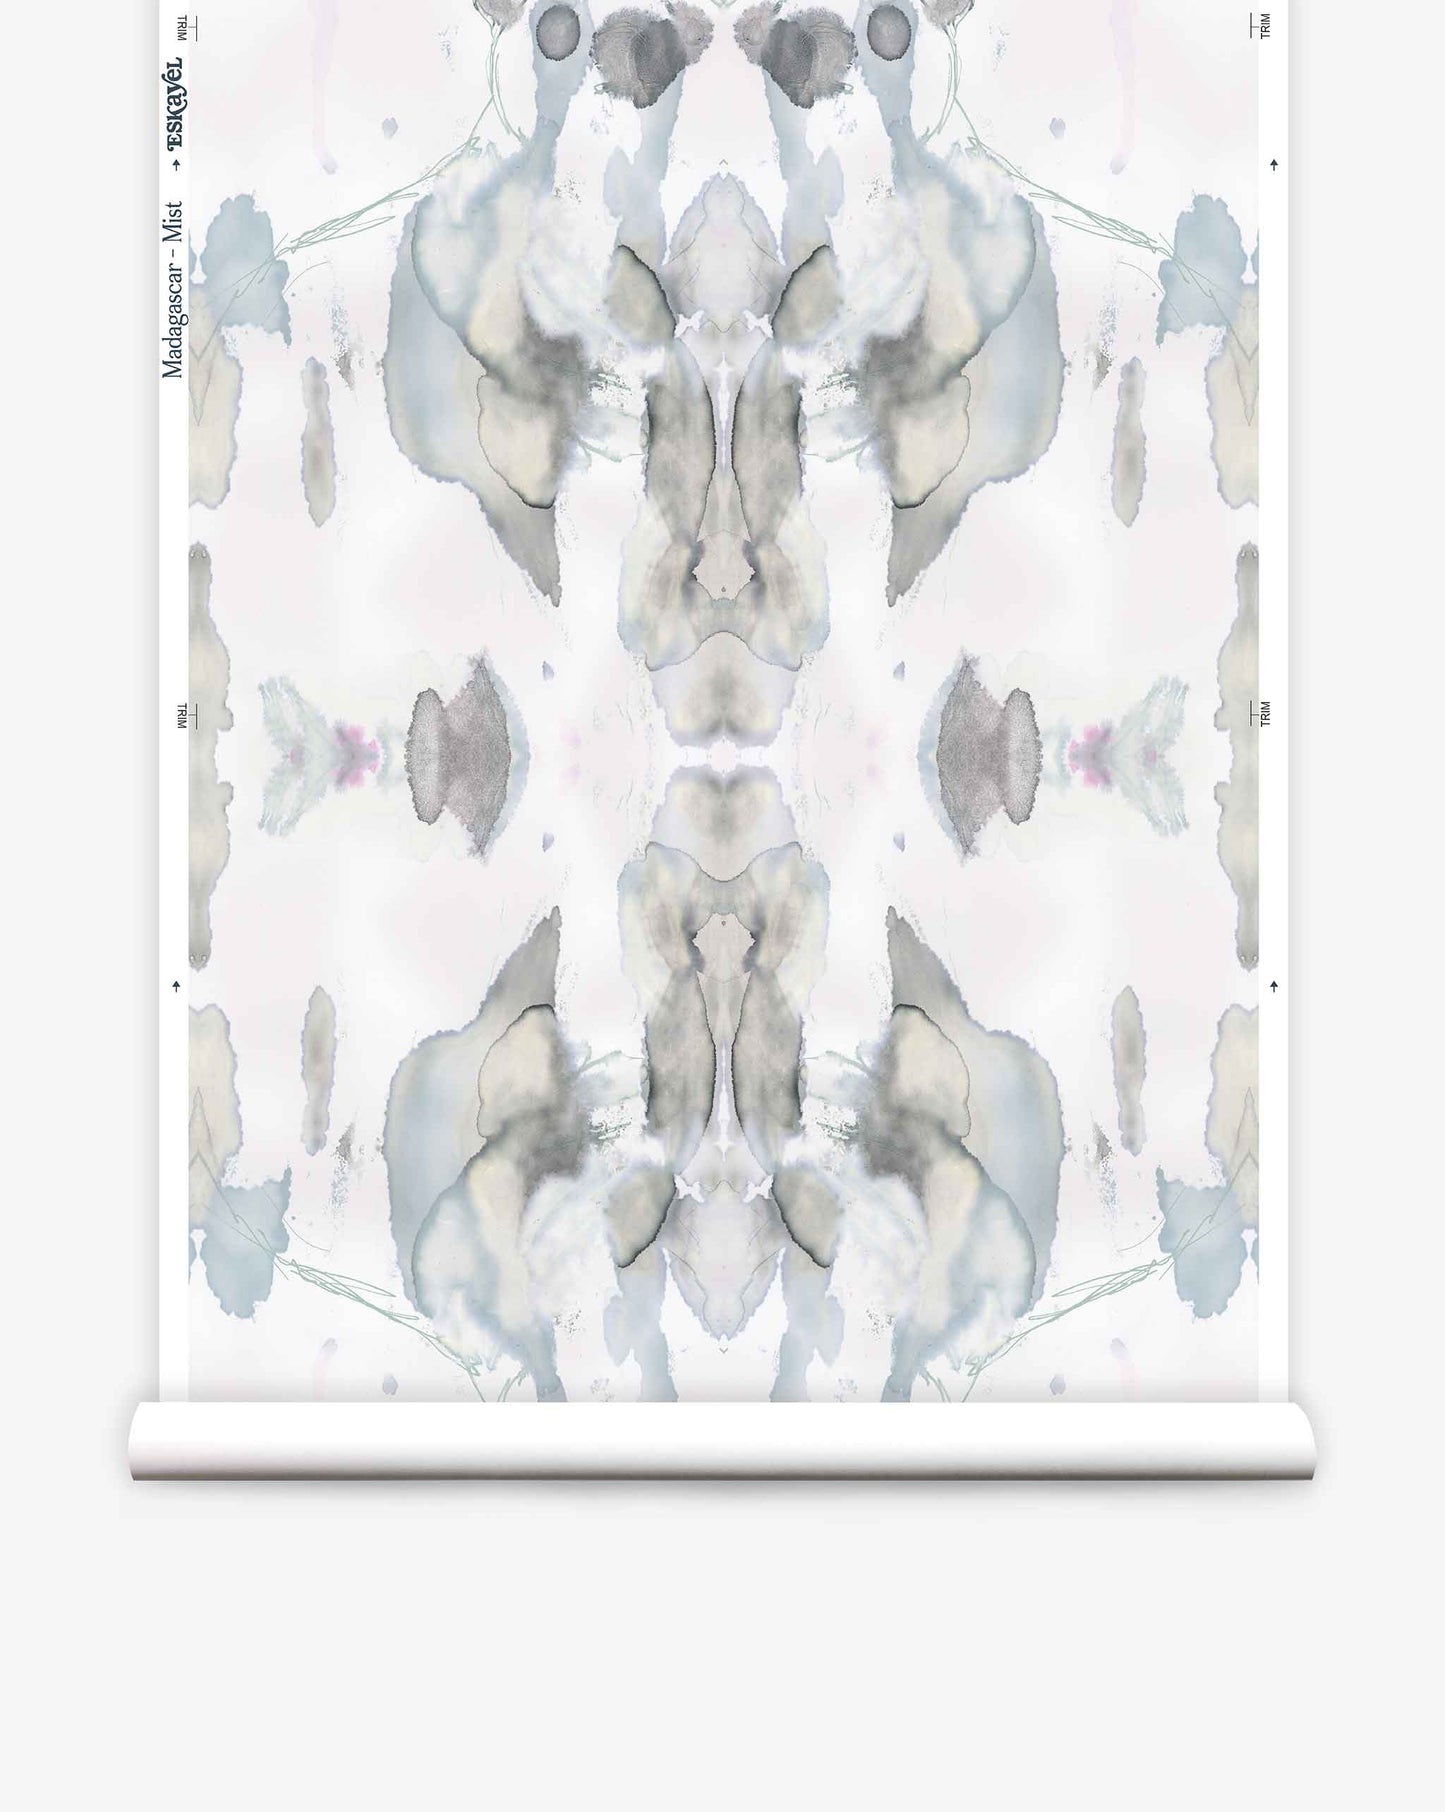 Abstract symmetrical ink blot design in shades of gray and blue on a white background, resembling a high-end Madagascar Wallpaper||Mist Rorschach test pattern.